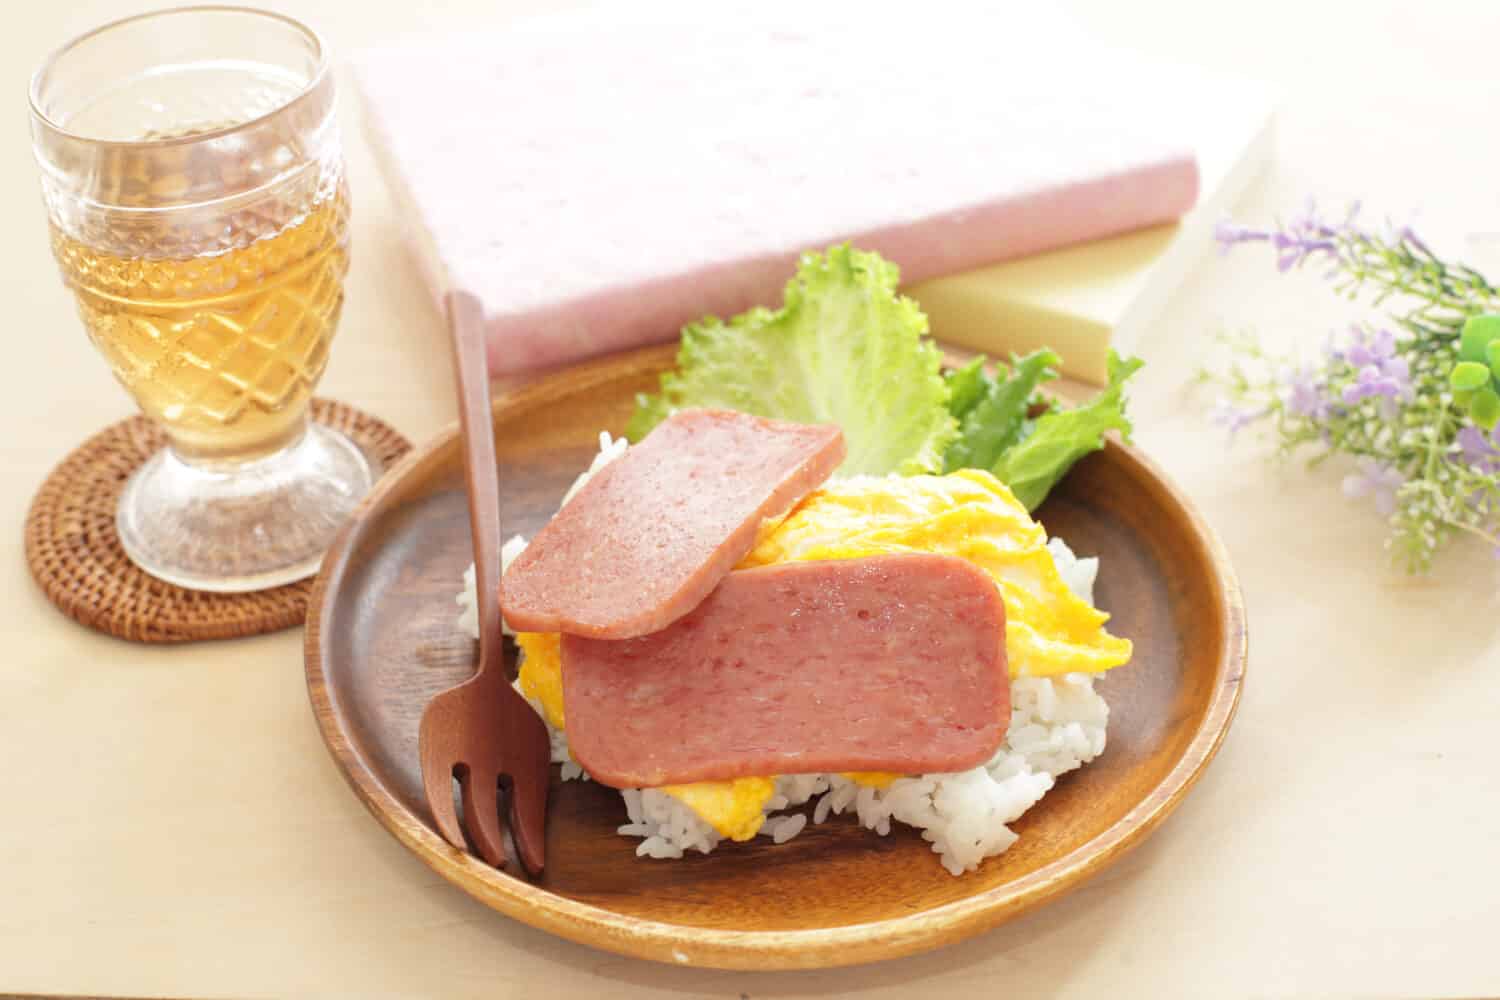 Asian food, pan fried luncheon meat and scrambled egg on rice